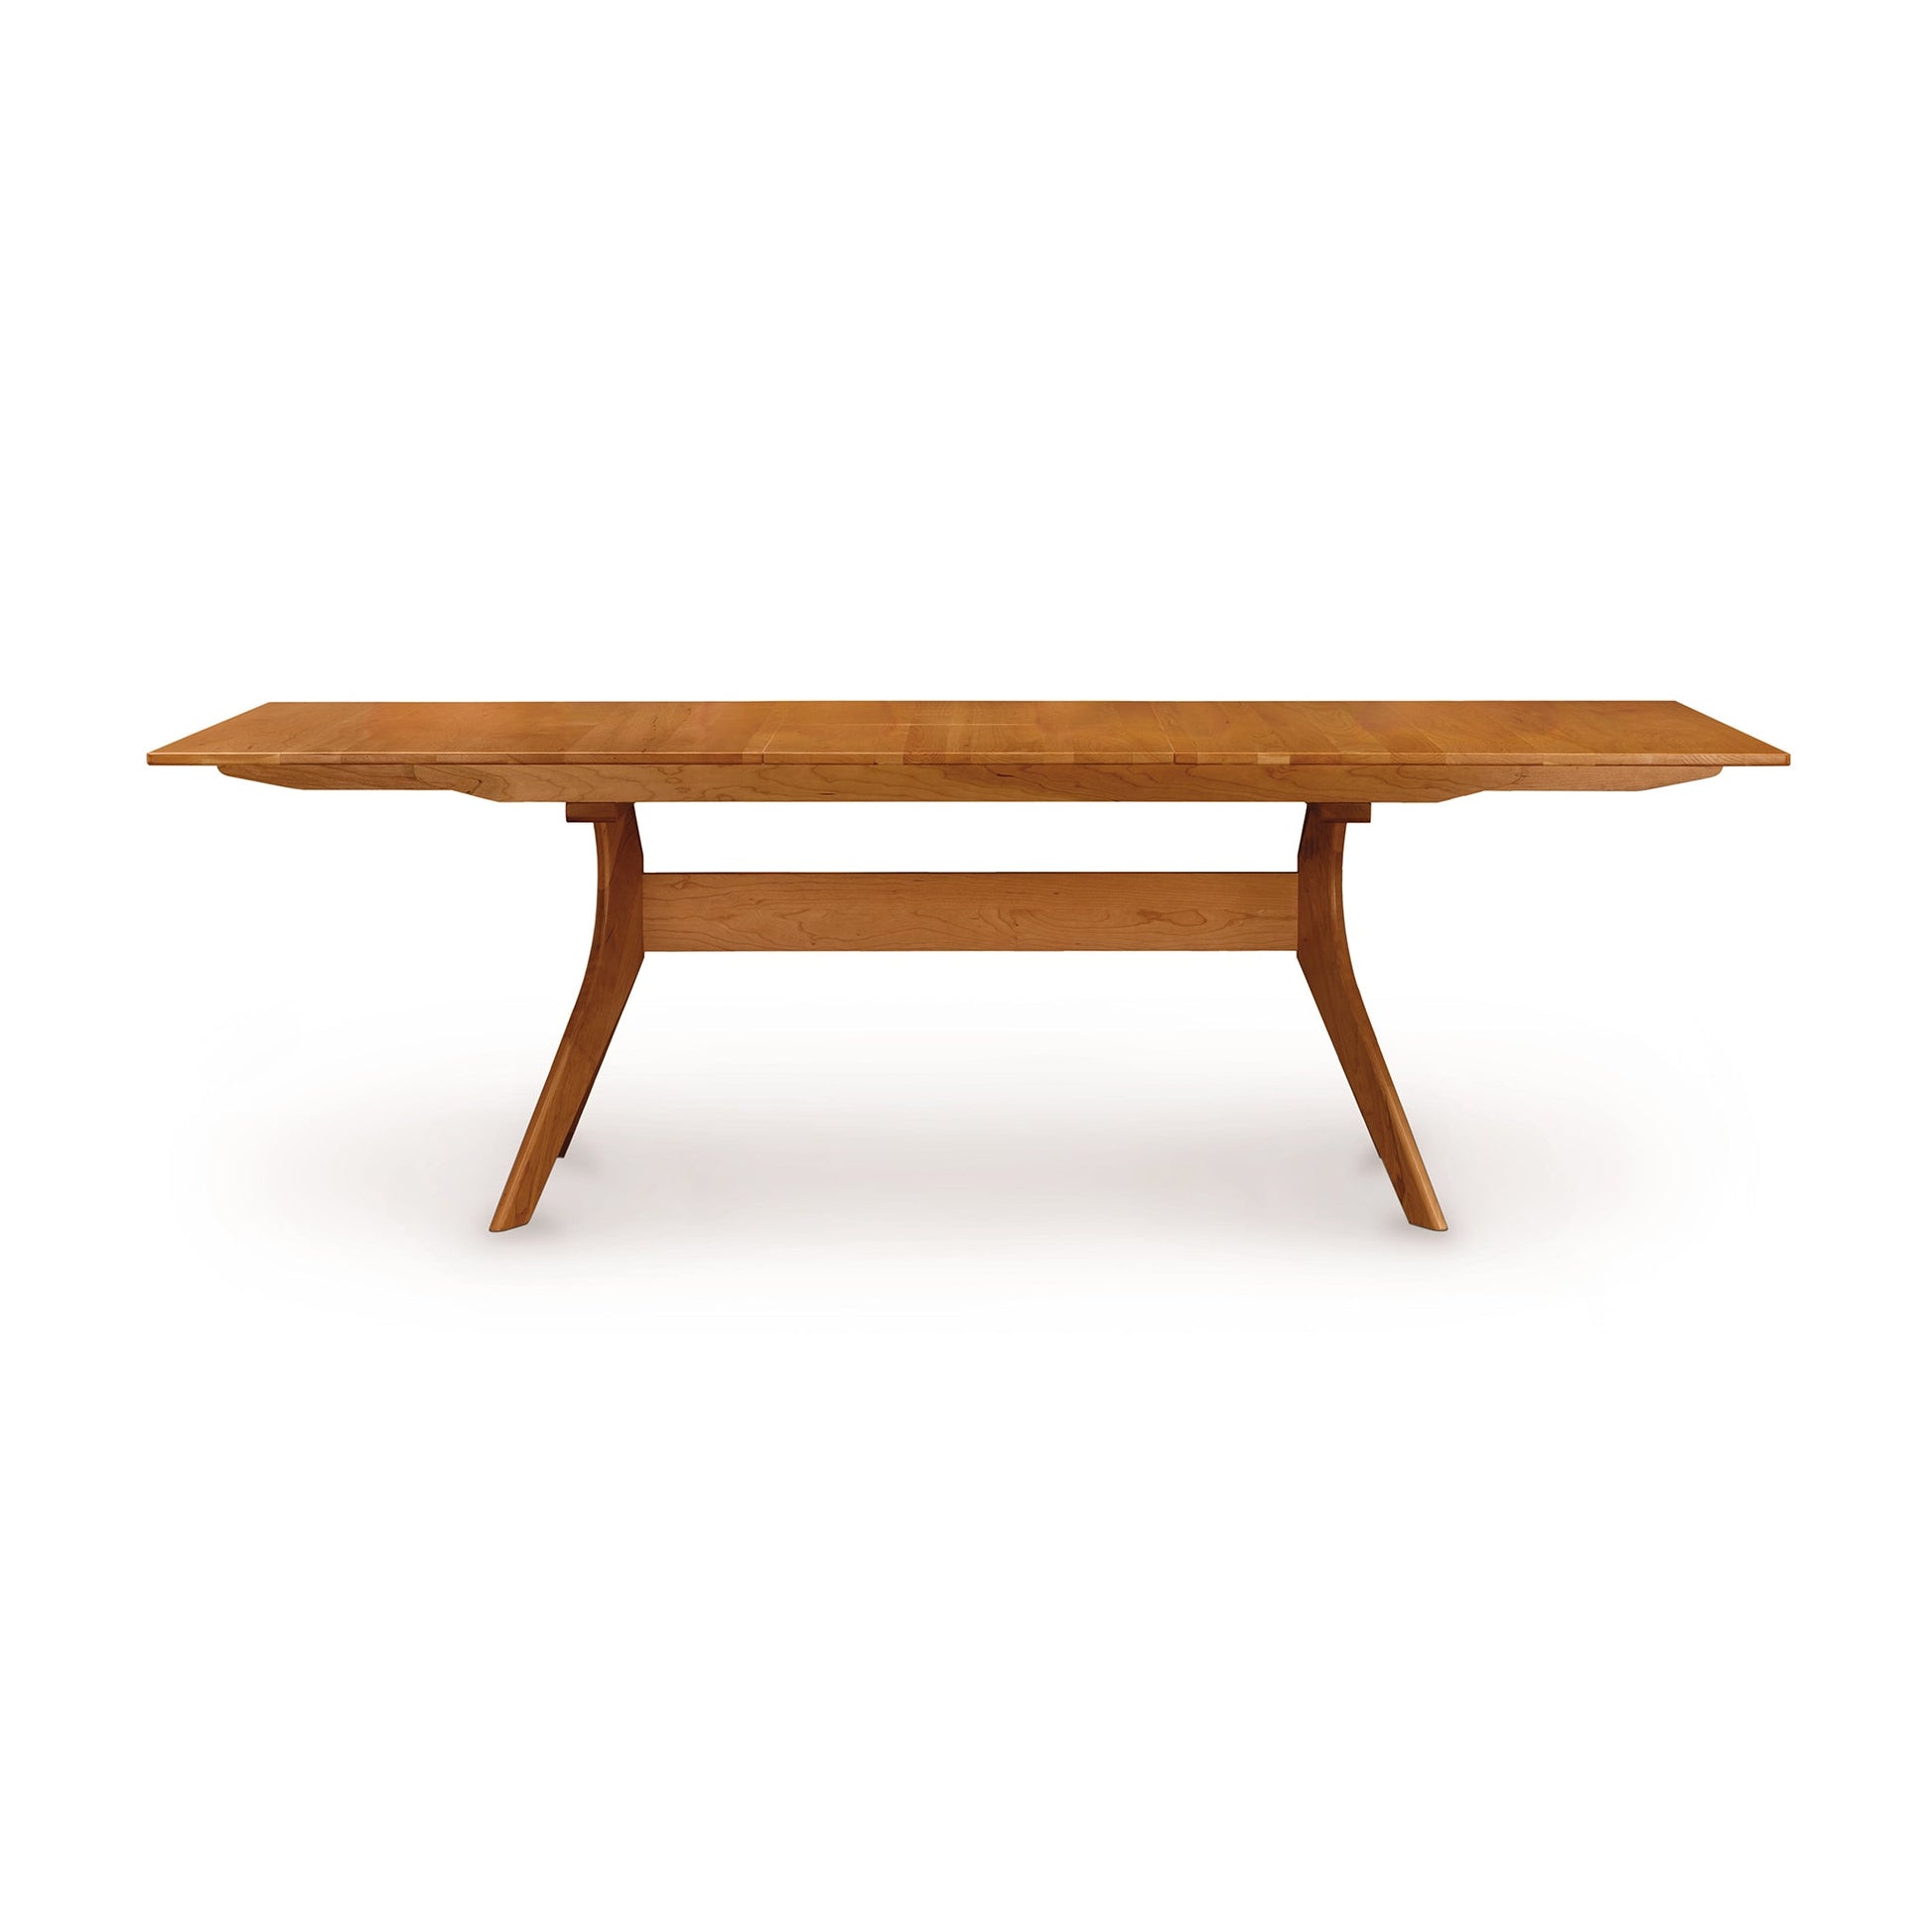 A wooden dining table with a wooden top.